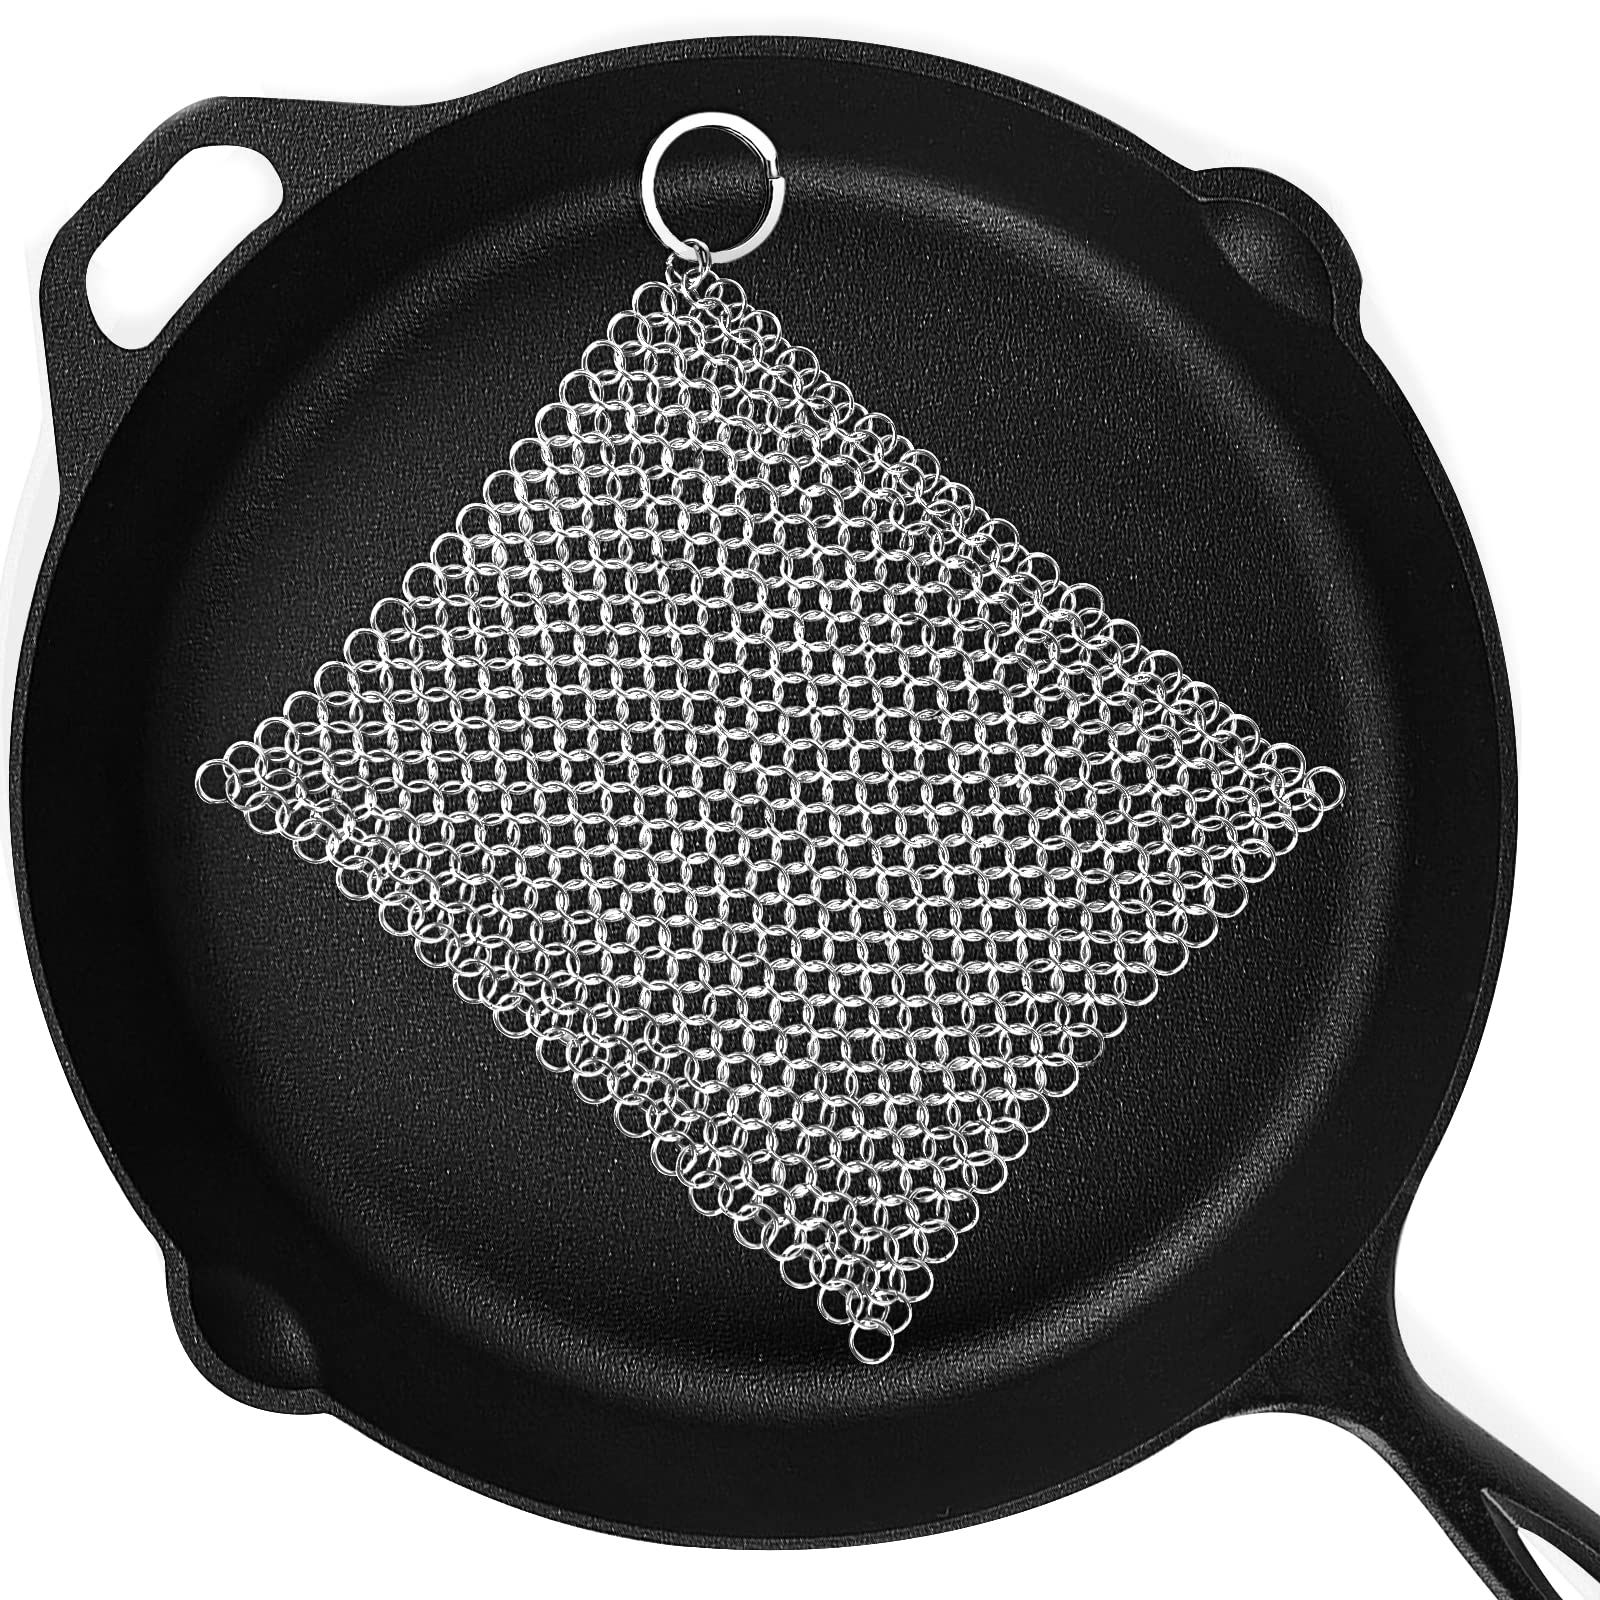 The ringer Cast Iron Cleaner 316 Stainless Steel 8x6 Inch - Top